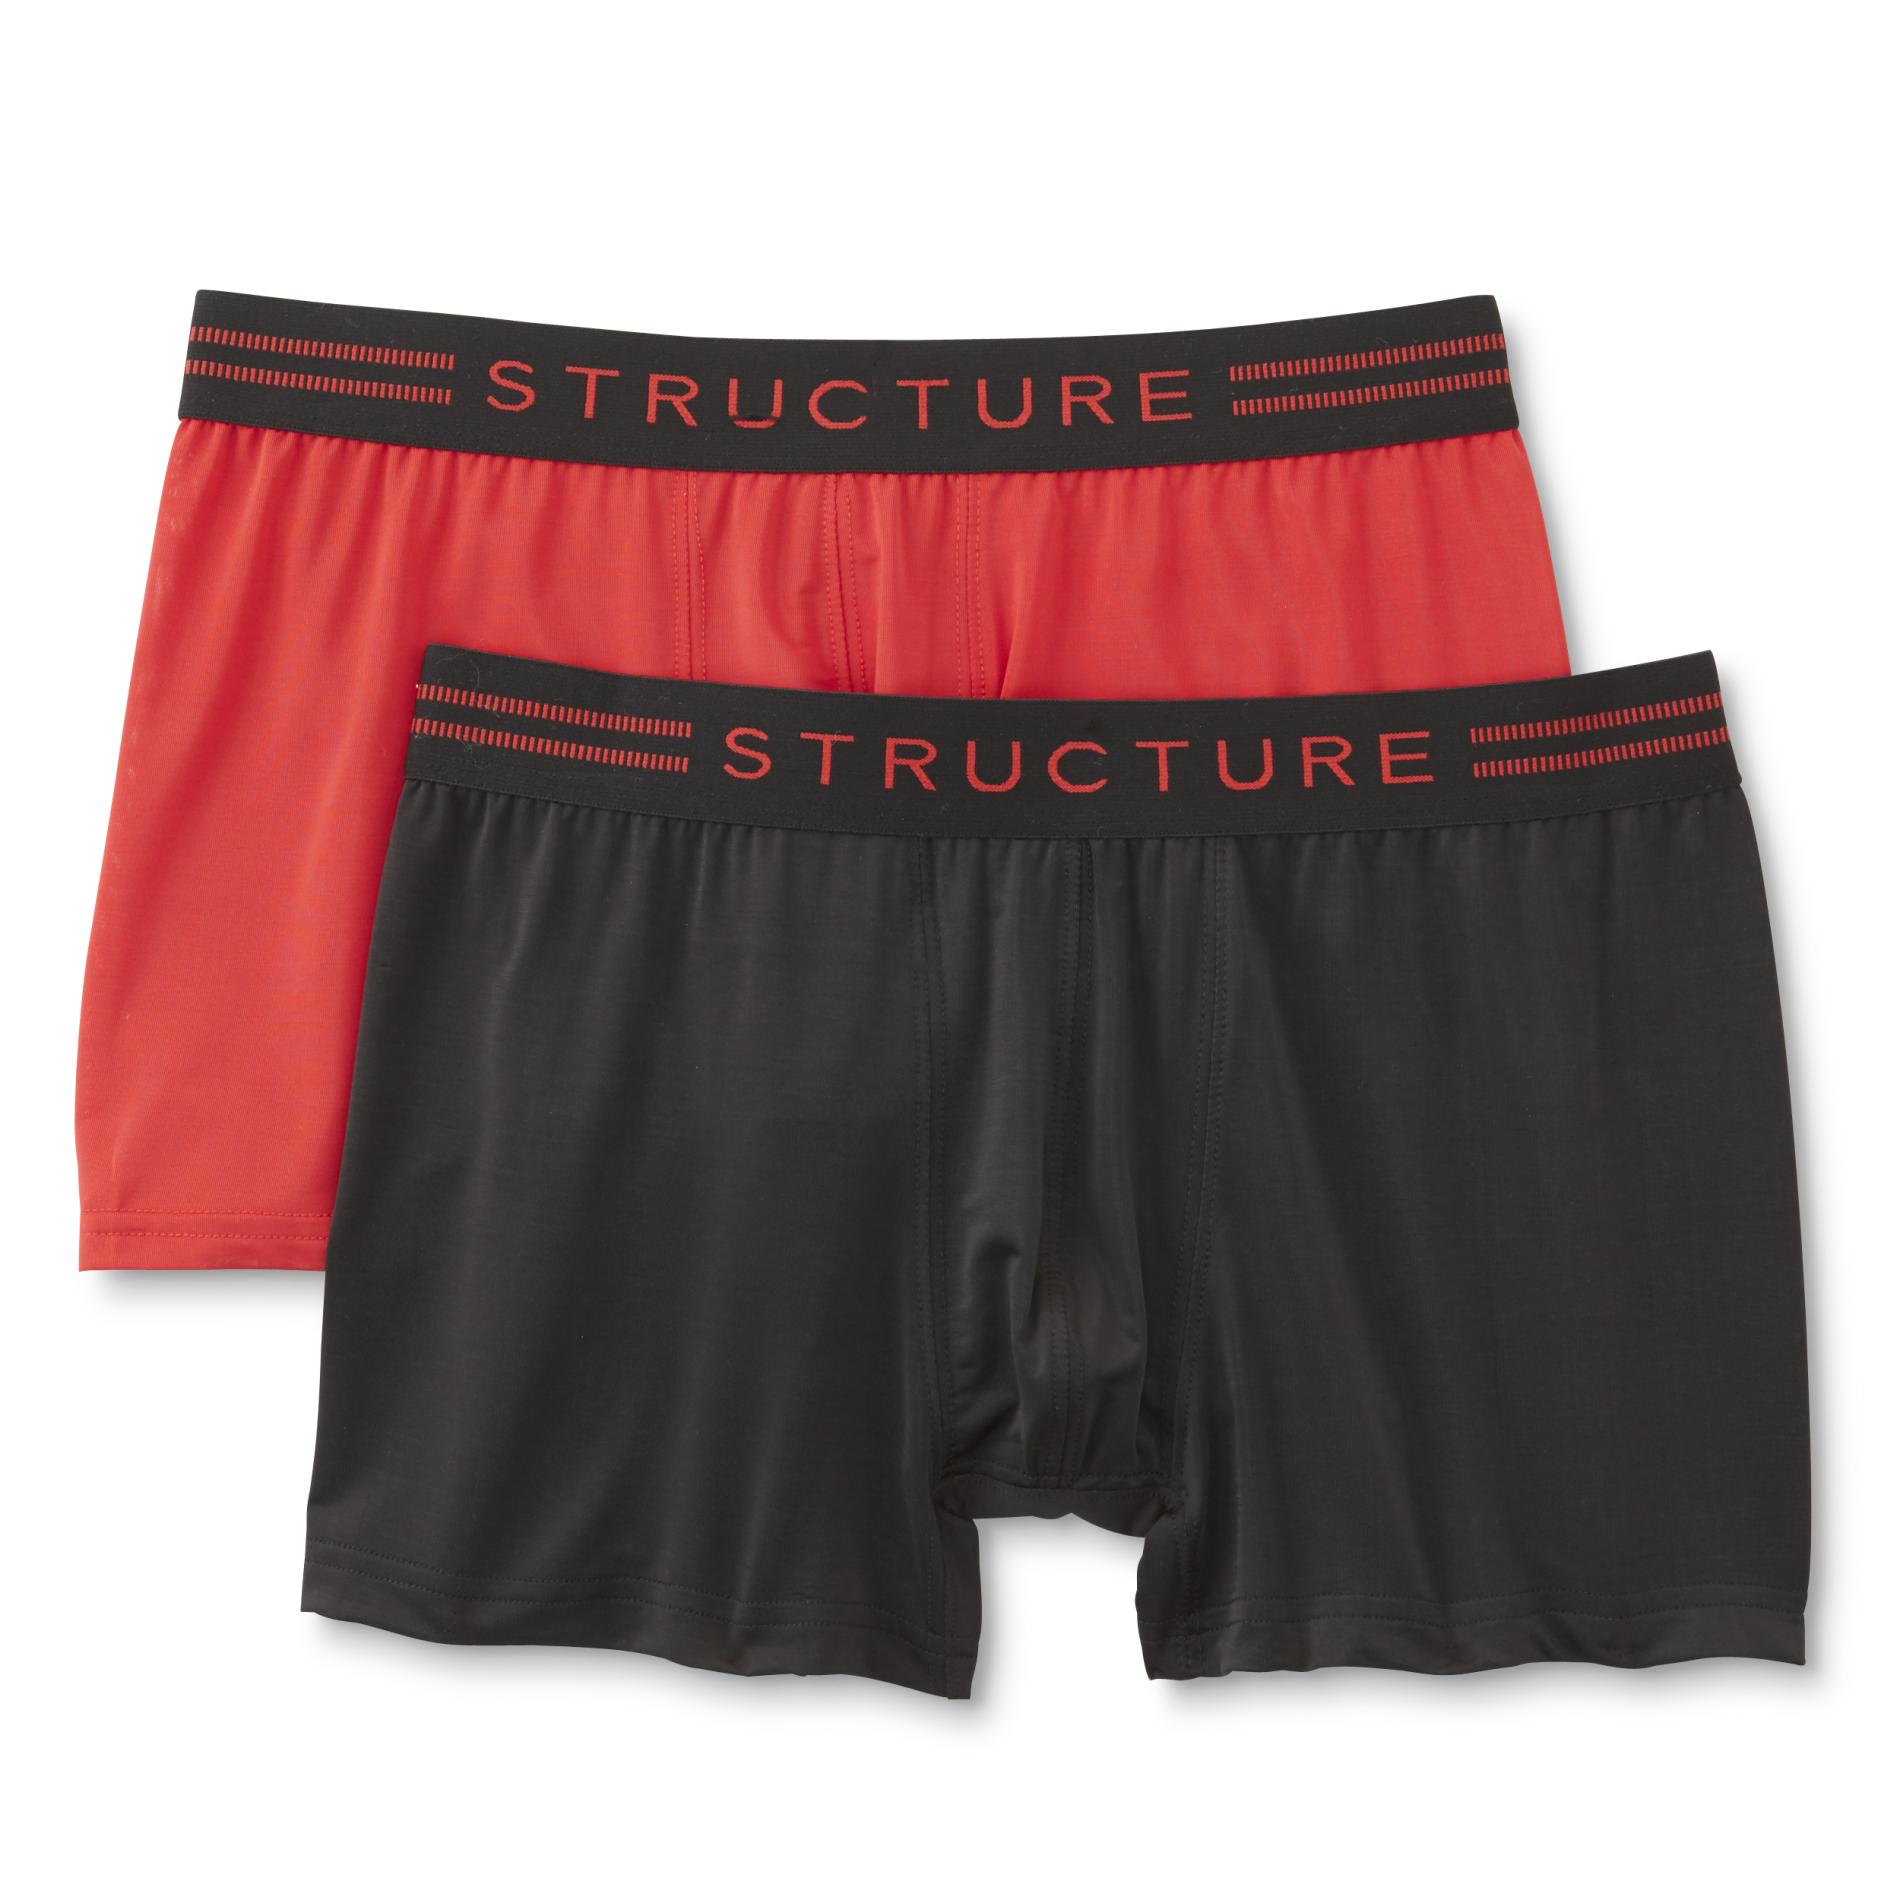 Structure Men's 2-Pairs Trunks